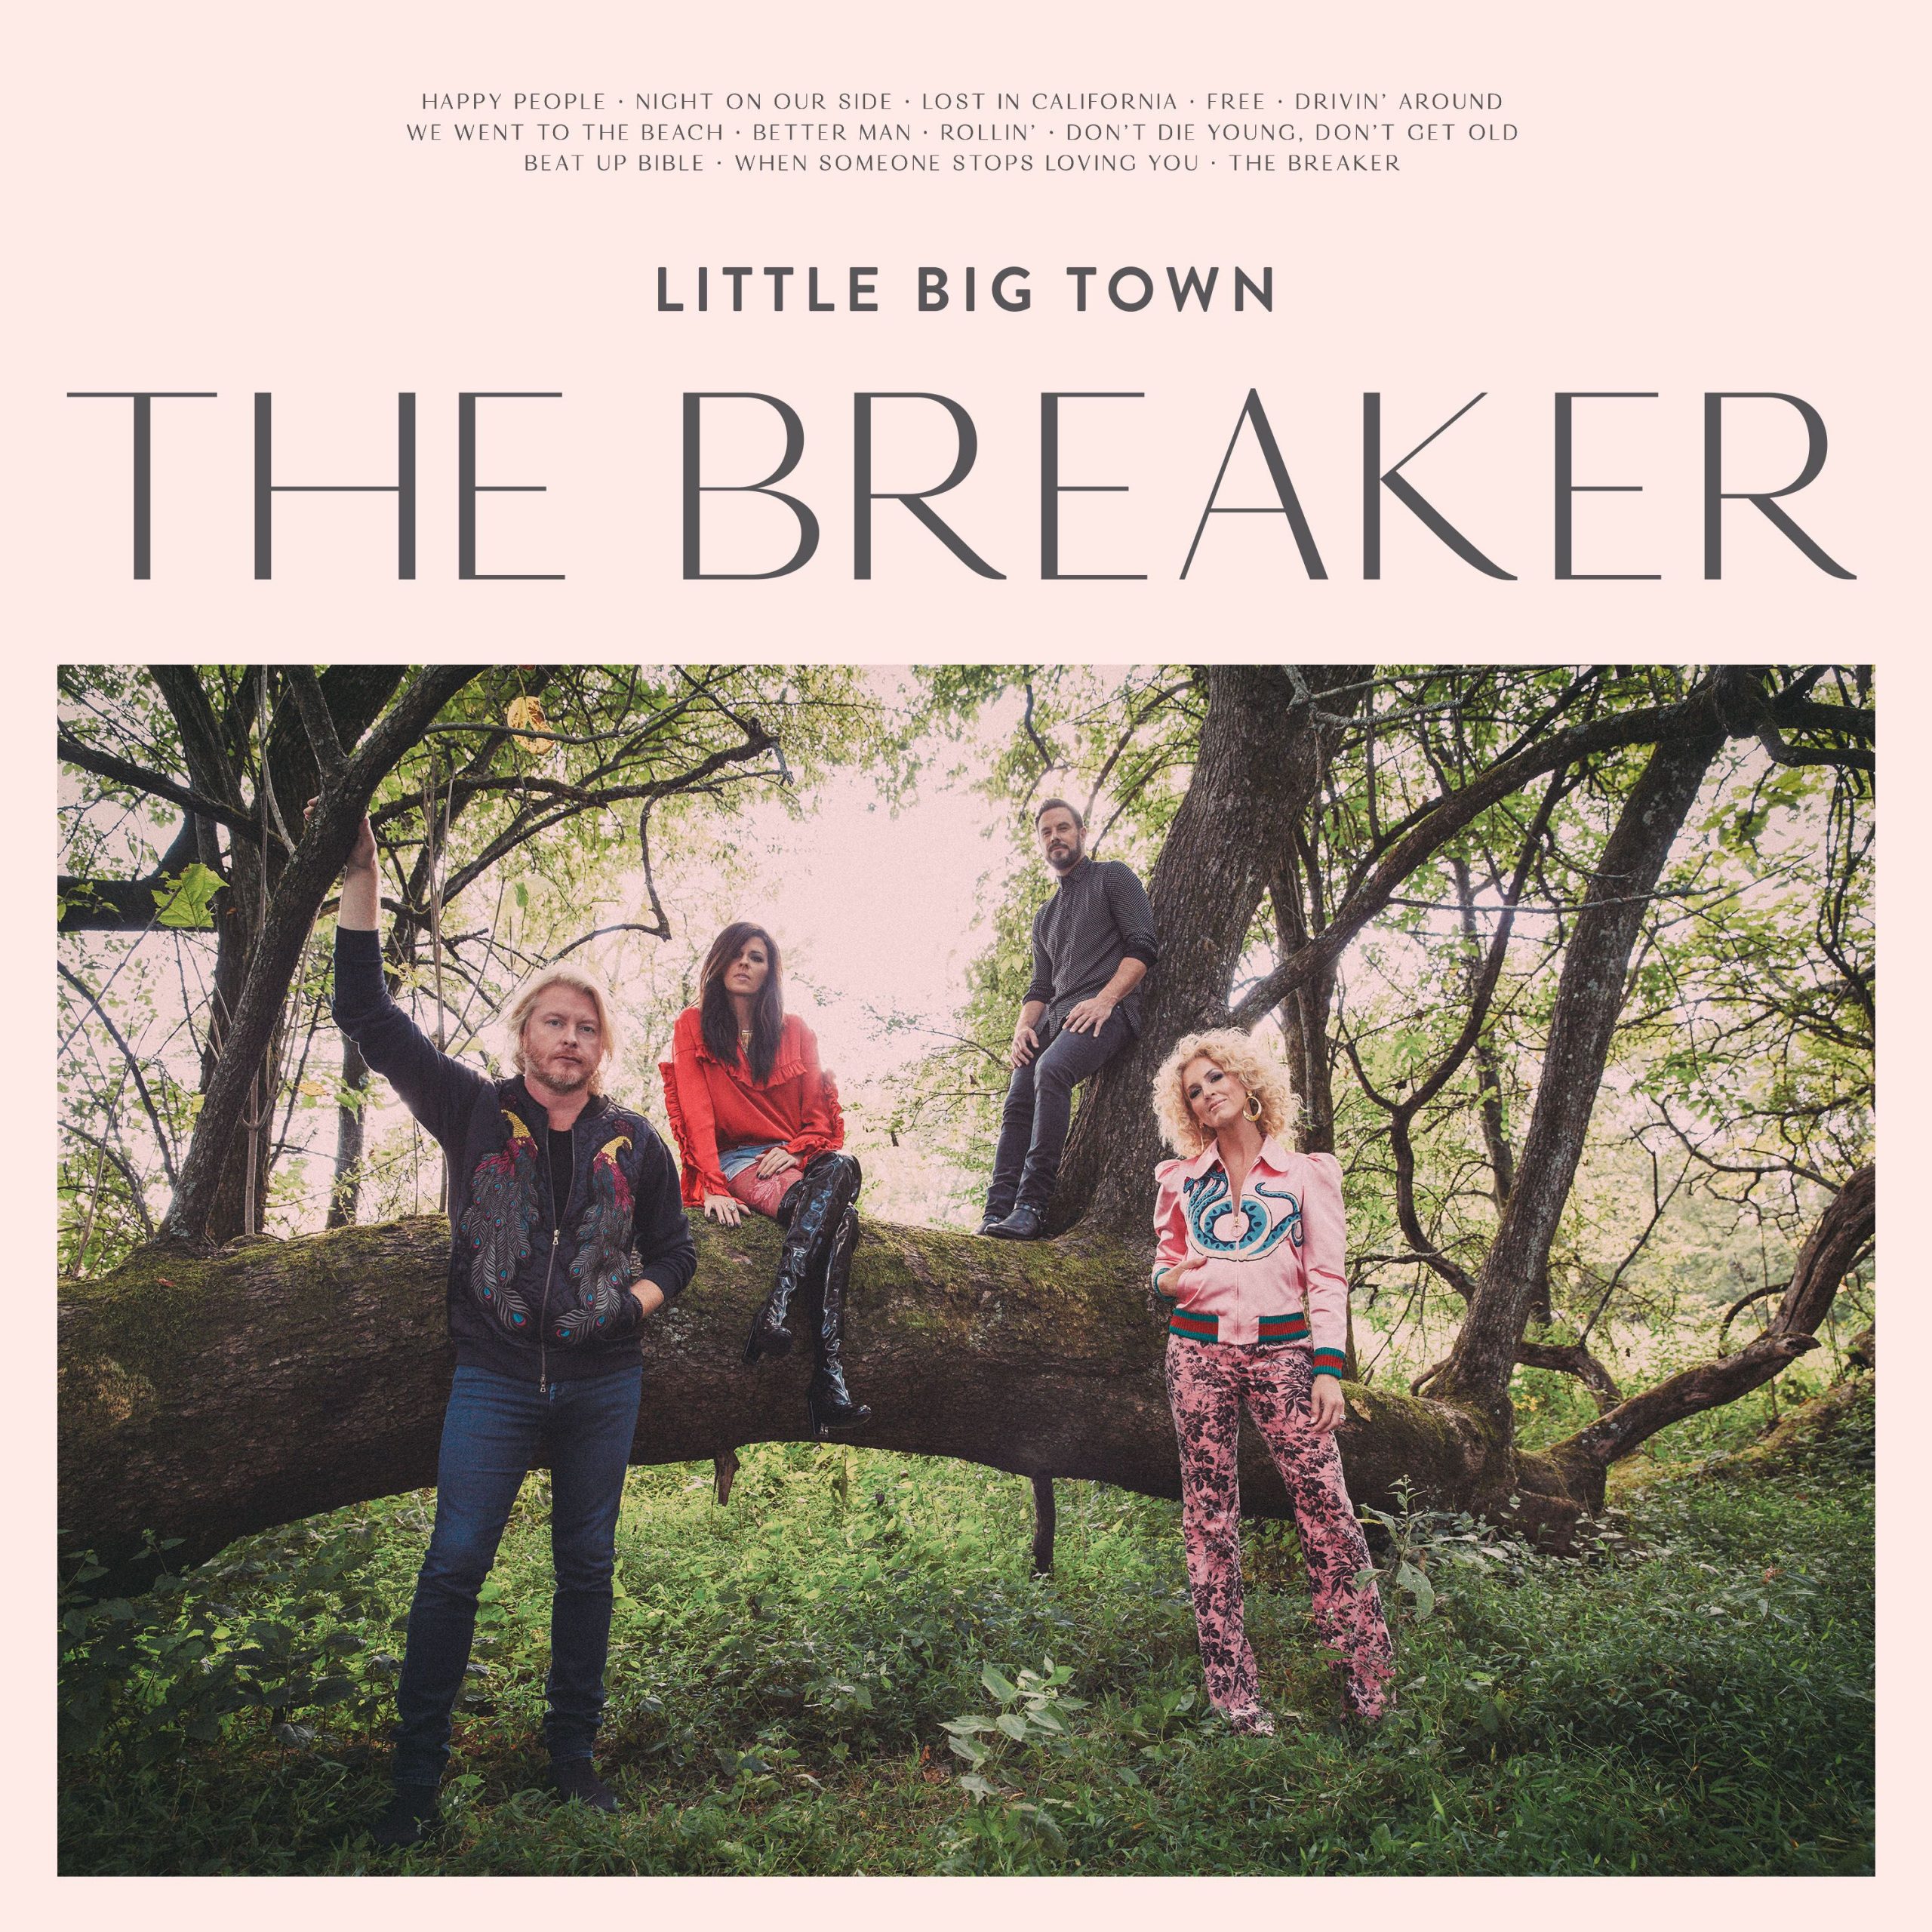 LITTLE BIG TOWN CELEBRATES THE BREAKER LAUNCH WITH THE TONIGHT SHOW, TODAY SHOW, ELLEN AND THE TALK